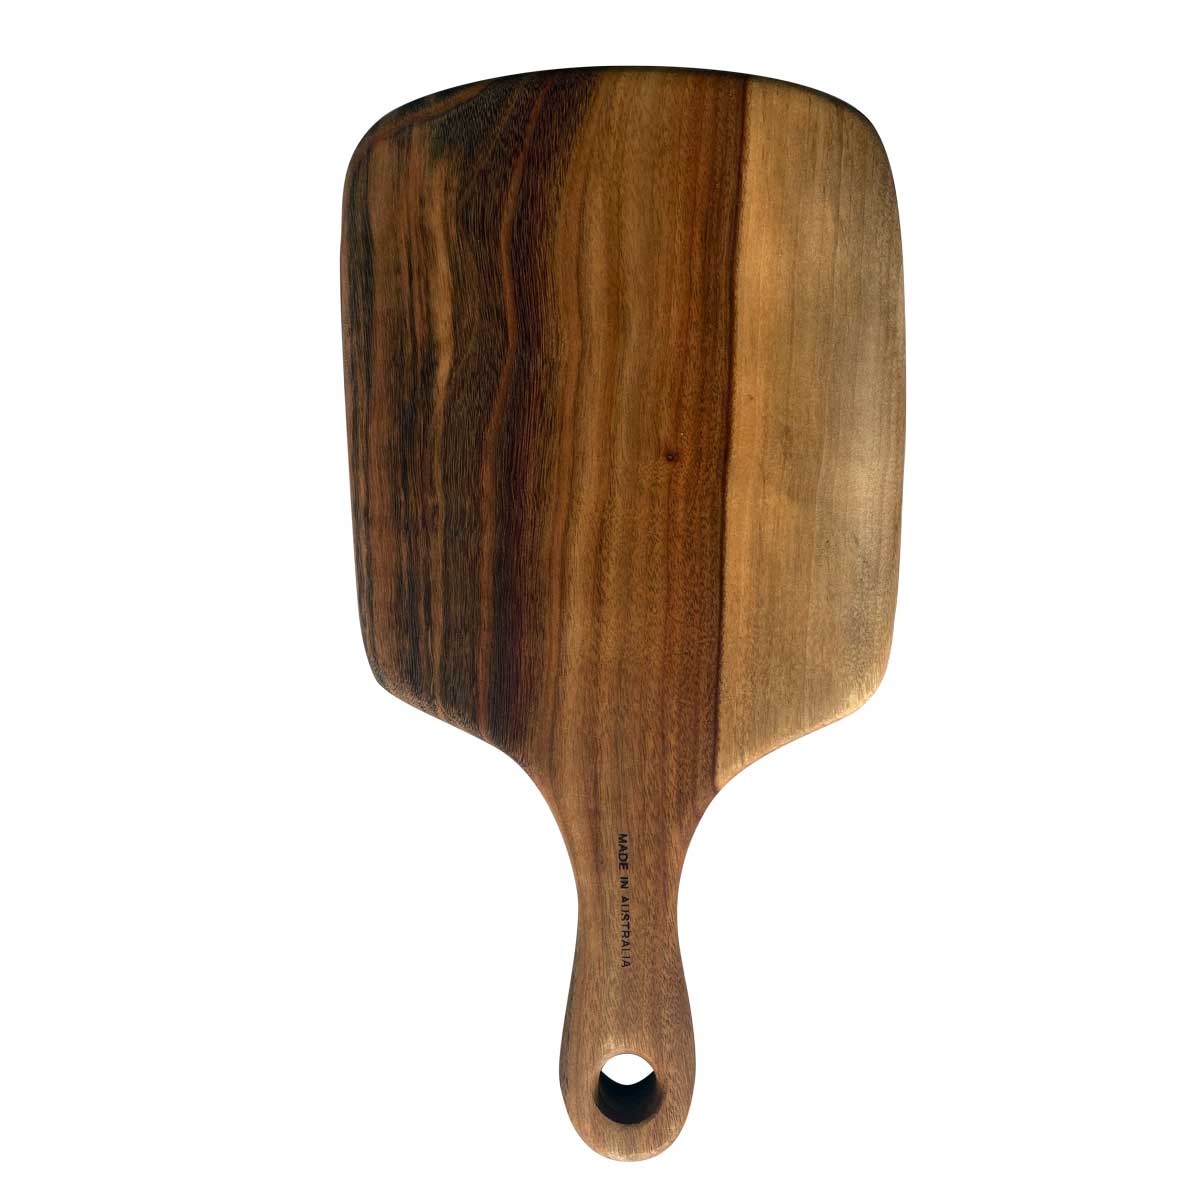 A wood charcuterie paddle or chopping board from Nature's Boards, designed with a handle in camphor laurel timber.